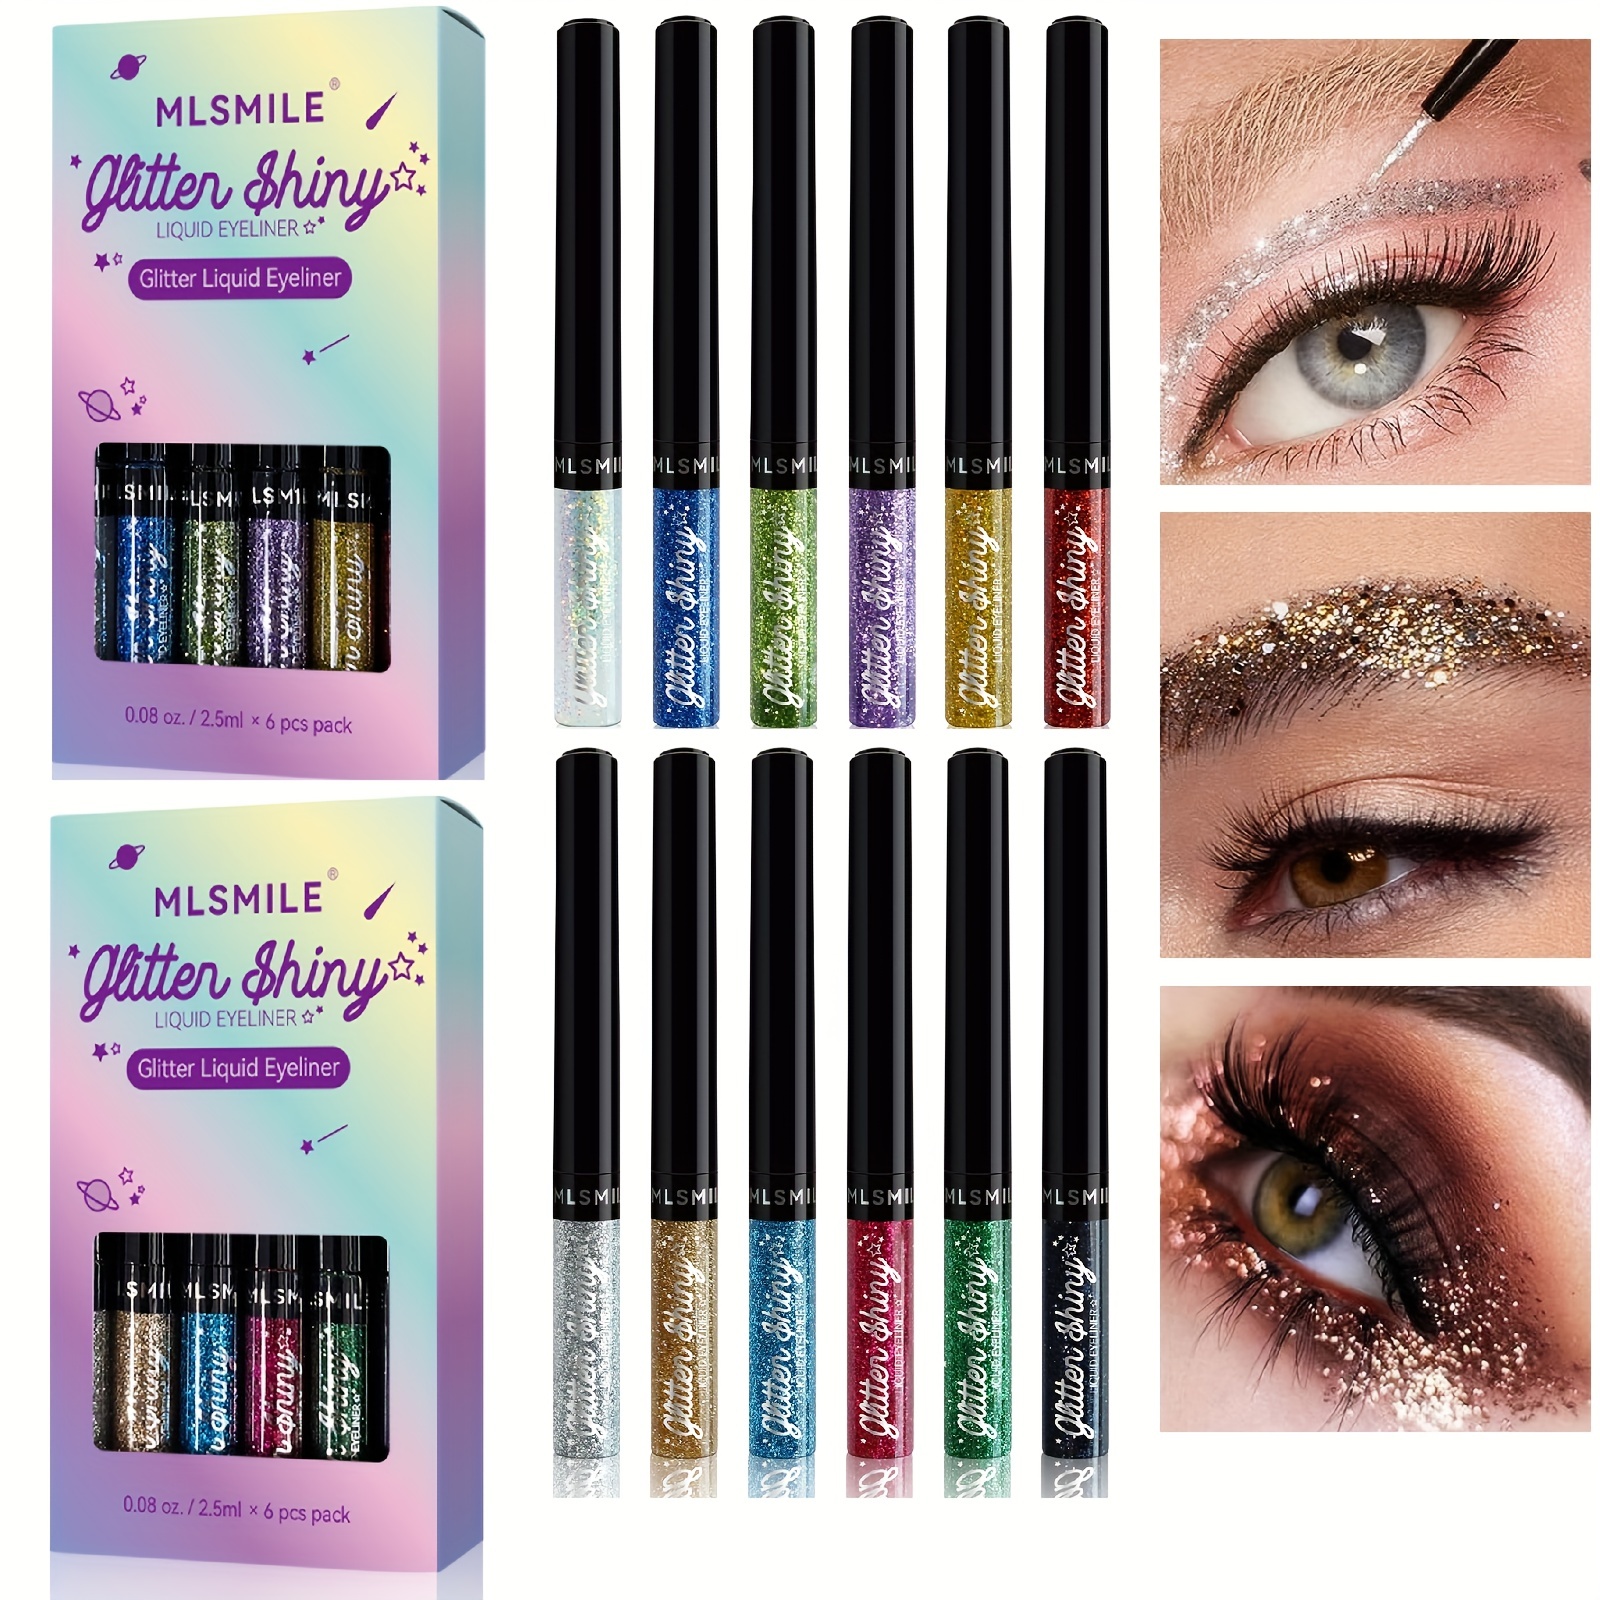 Eyeliners in Hong Kong - classification & prices 分類及價錢